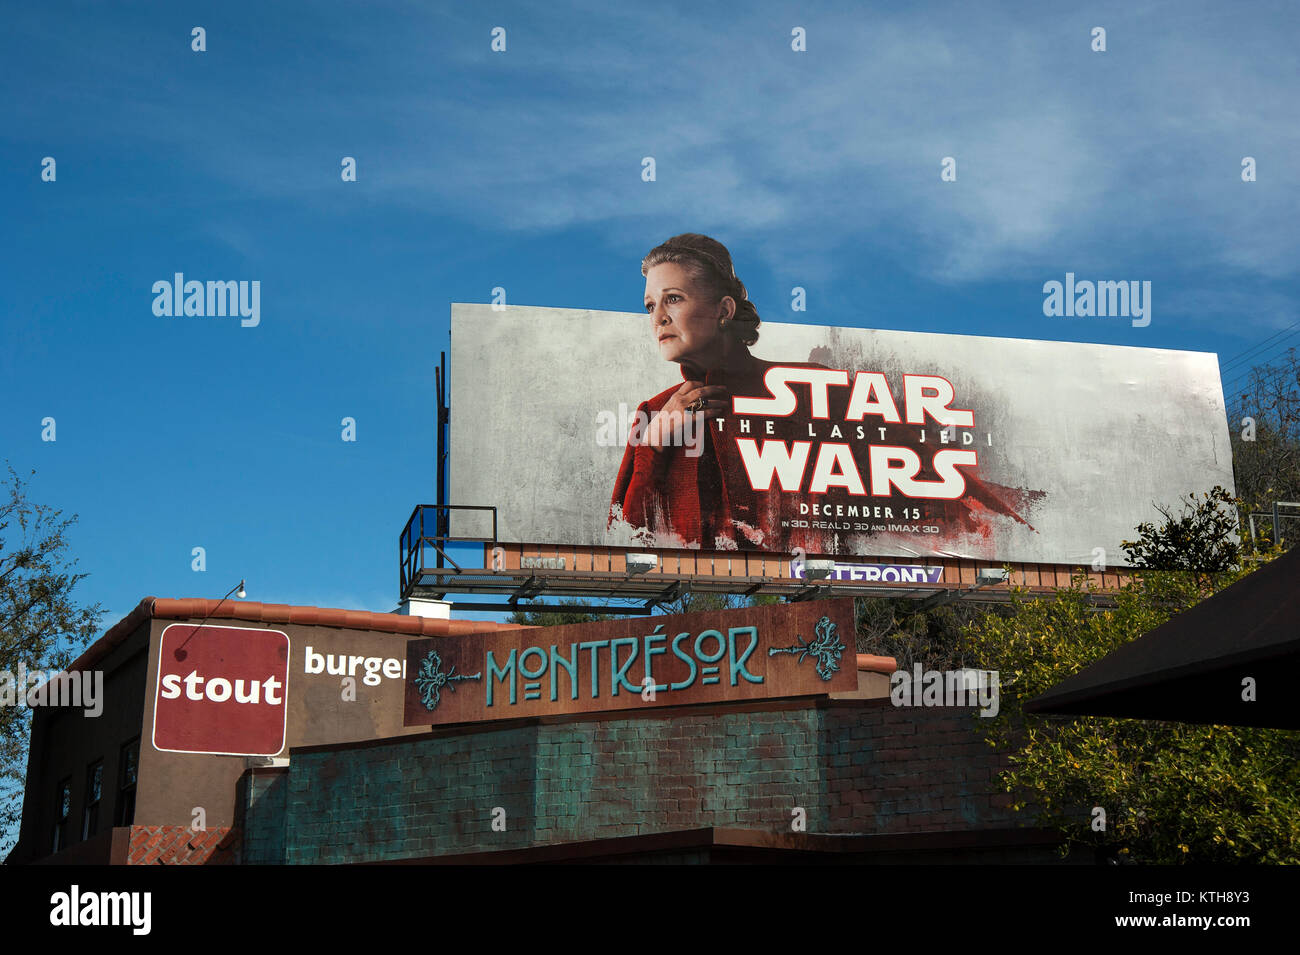 Billboard featuring Carrie Fisher promoting Star Wars the Last Jedi movie on Ventura Blvd. in the Studio City neighborhood of Los Angeles, CA Stock Photo